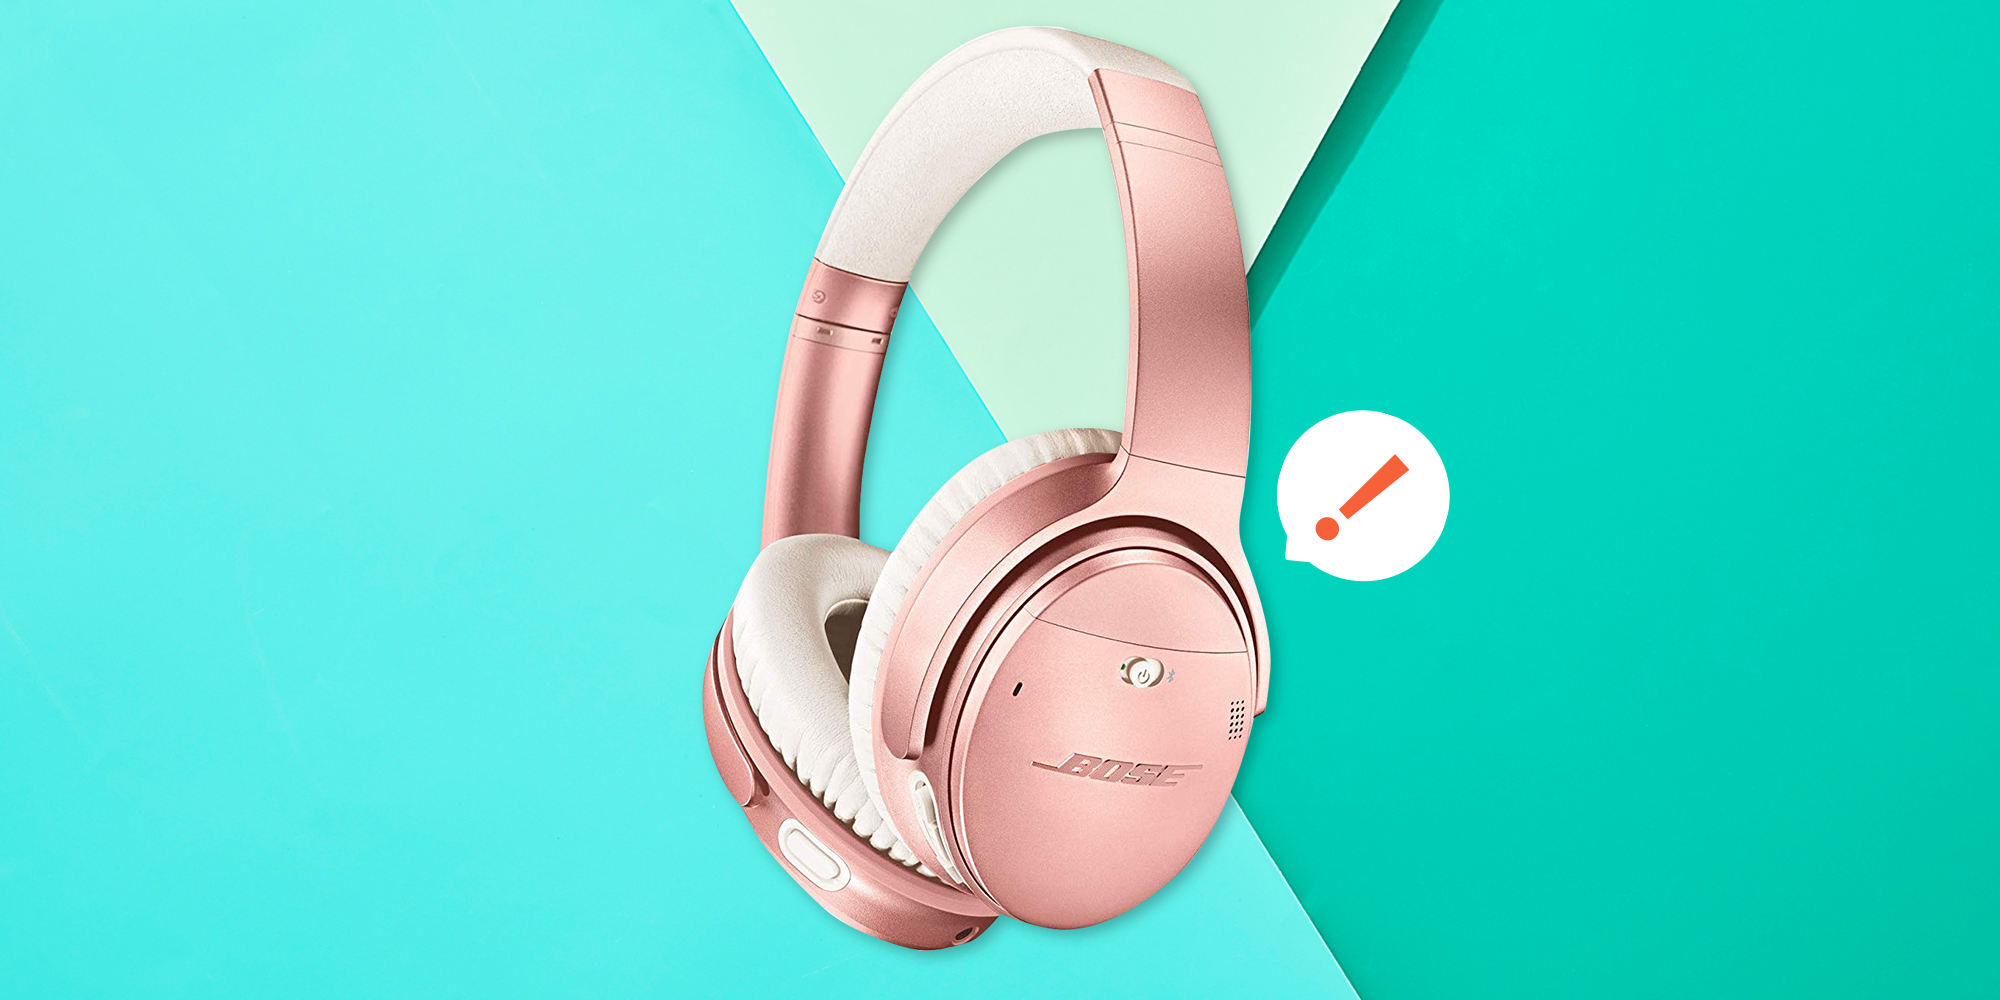 Bose's On Sale At Price Ever